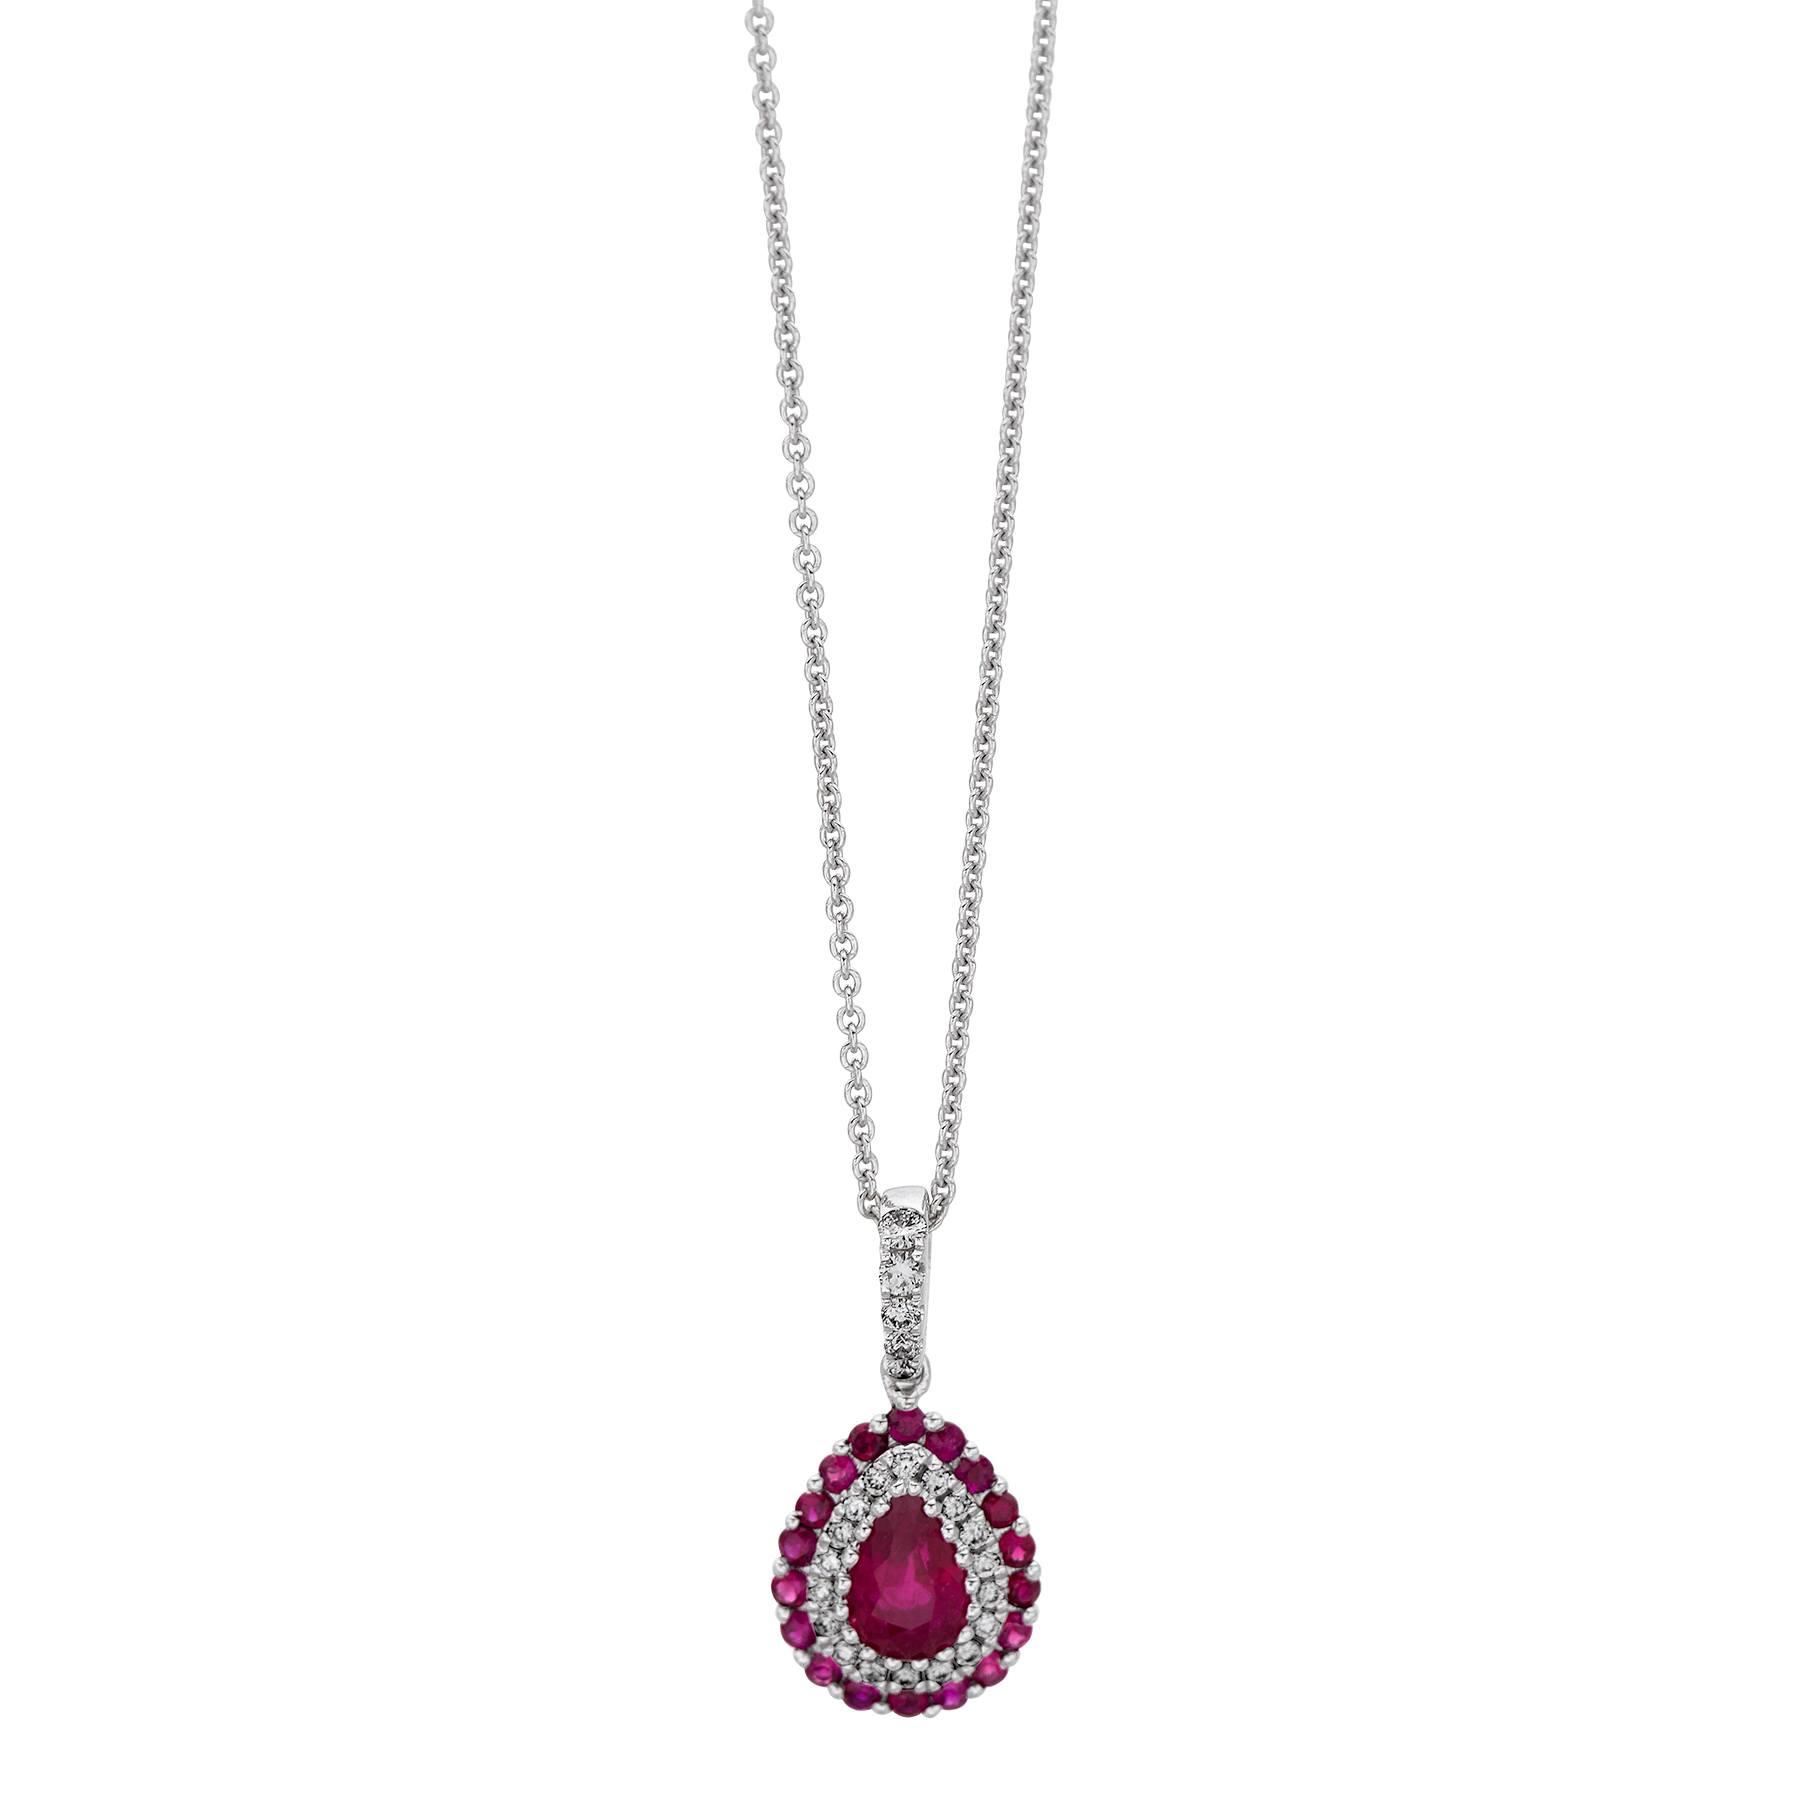 White Gold Pear Shaped Ruby & Diamond Halo Pendant Necklace